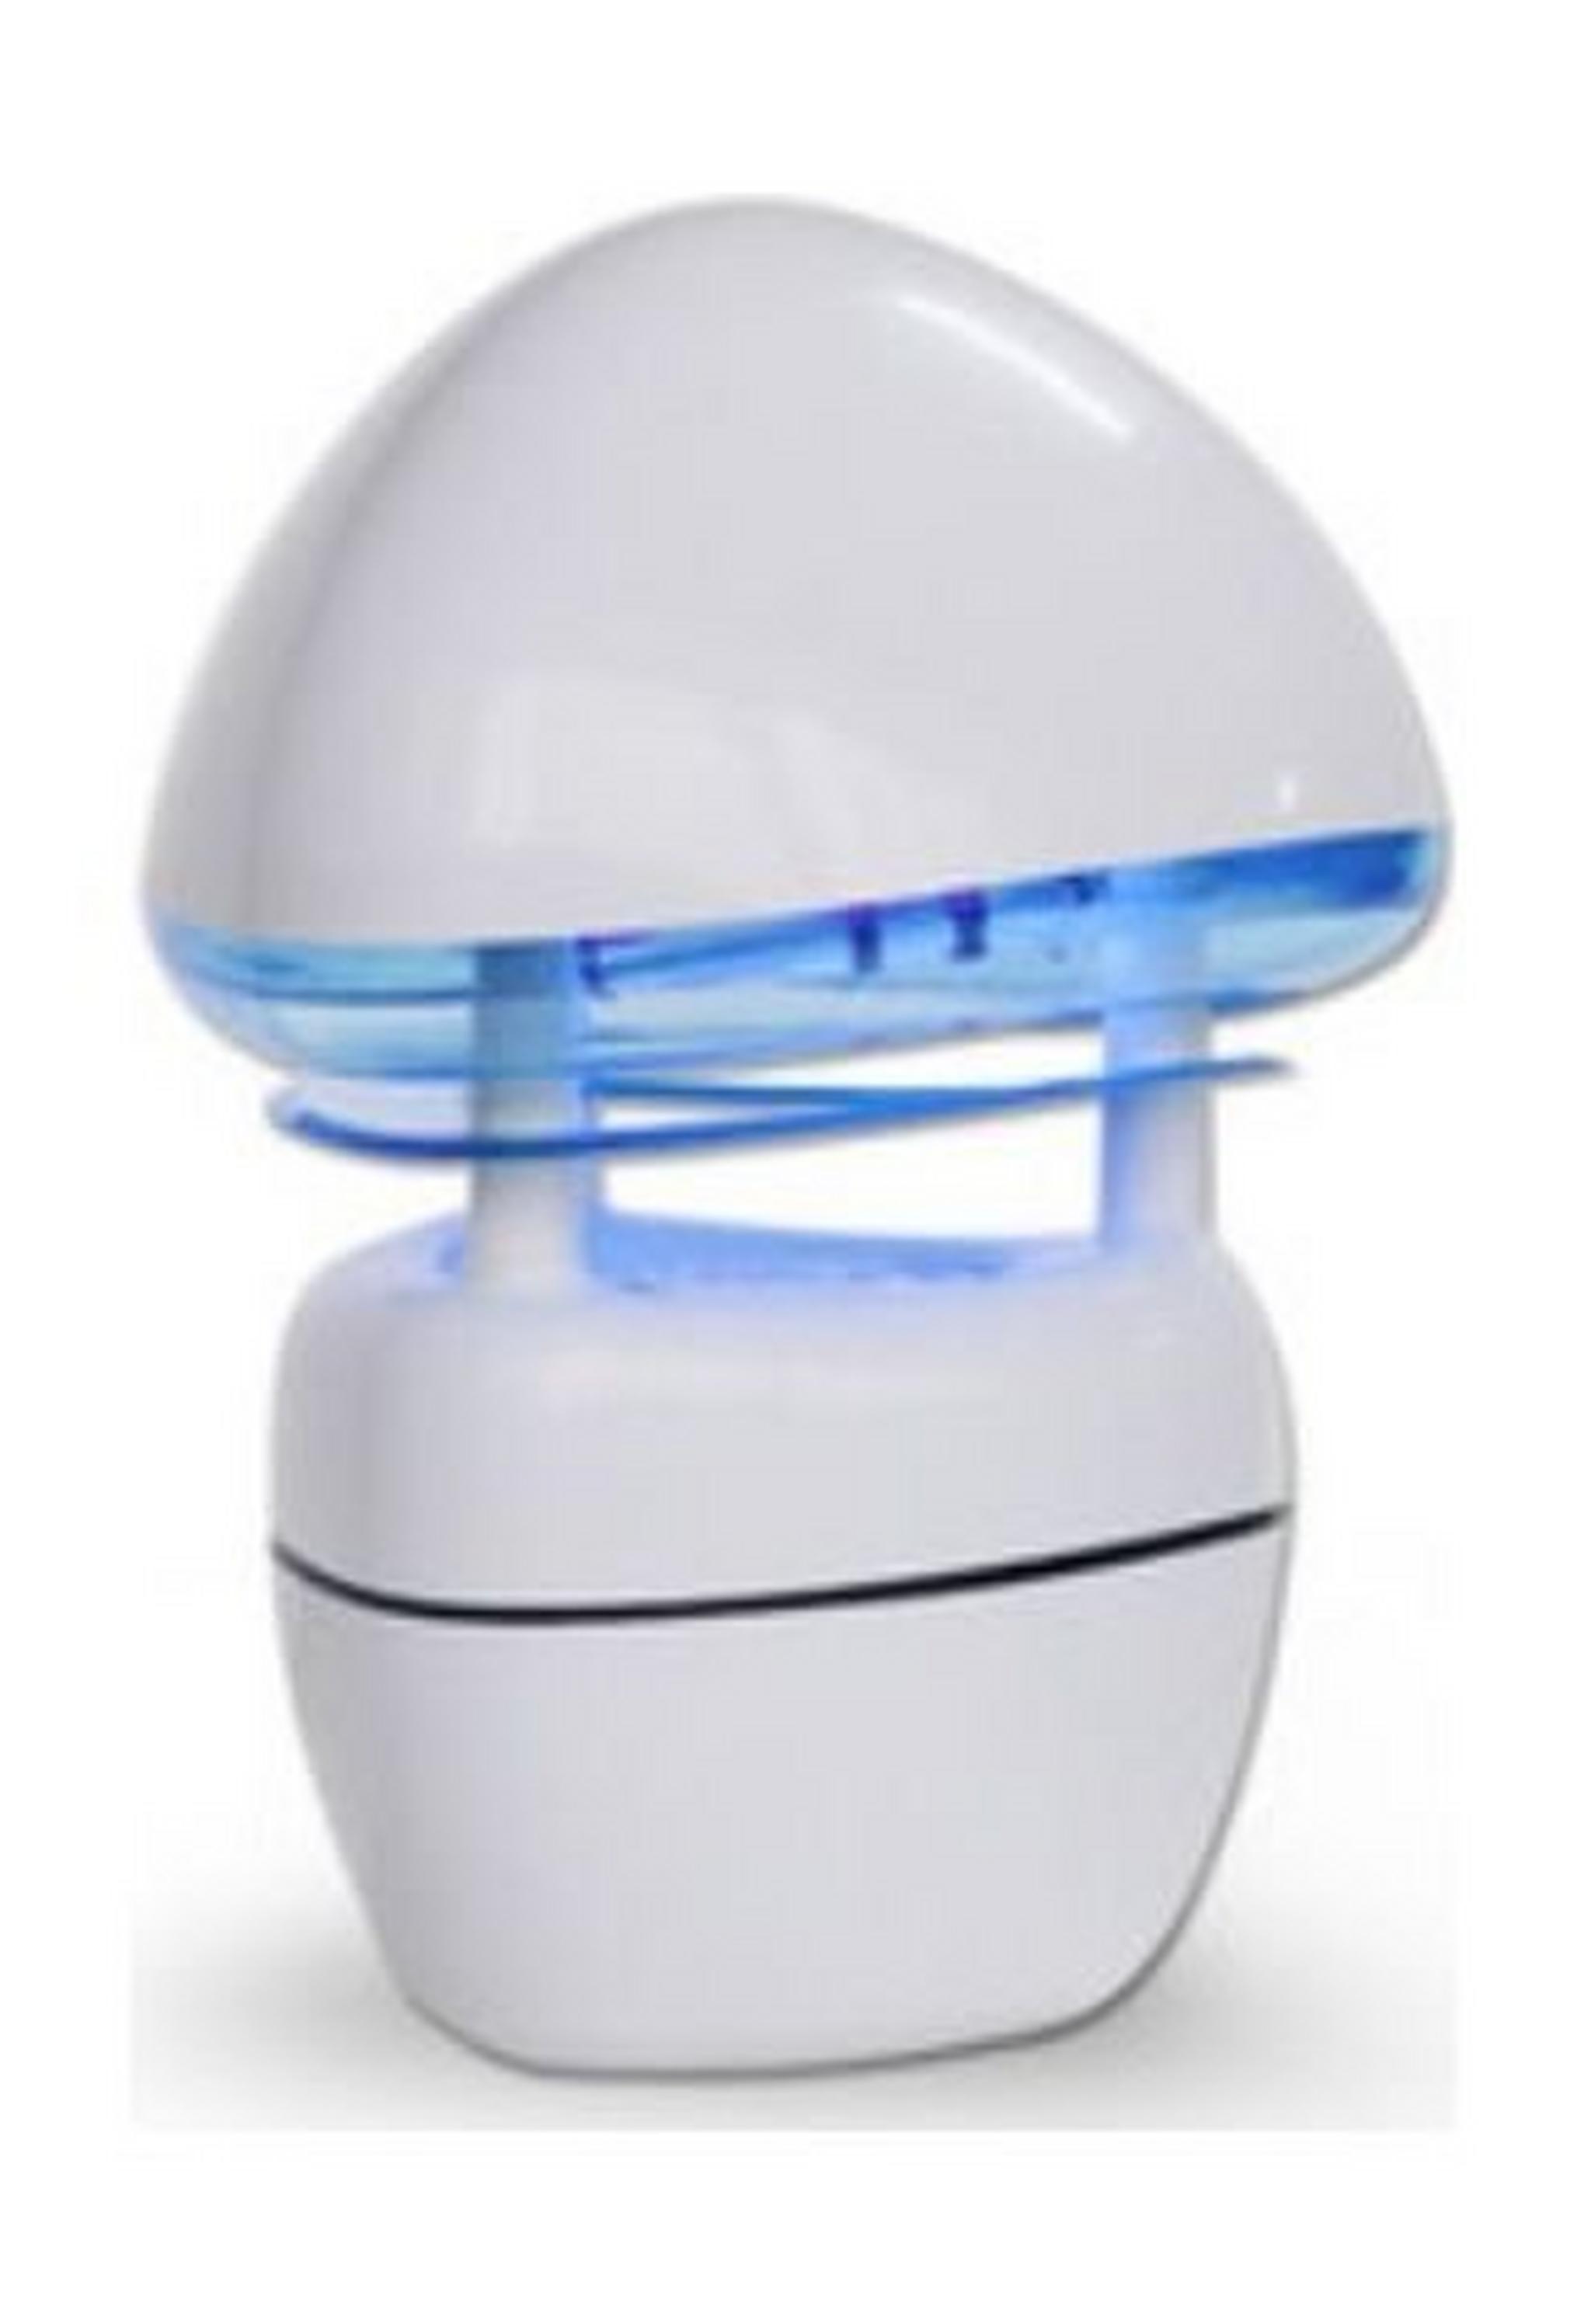 Wansa Insect Trap With UV-A Tube (CL-5004) - White